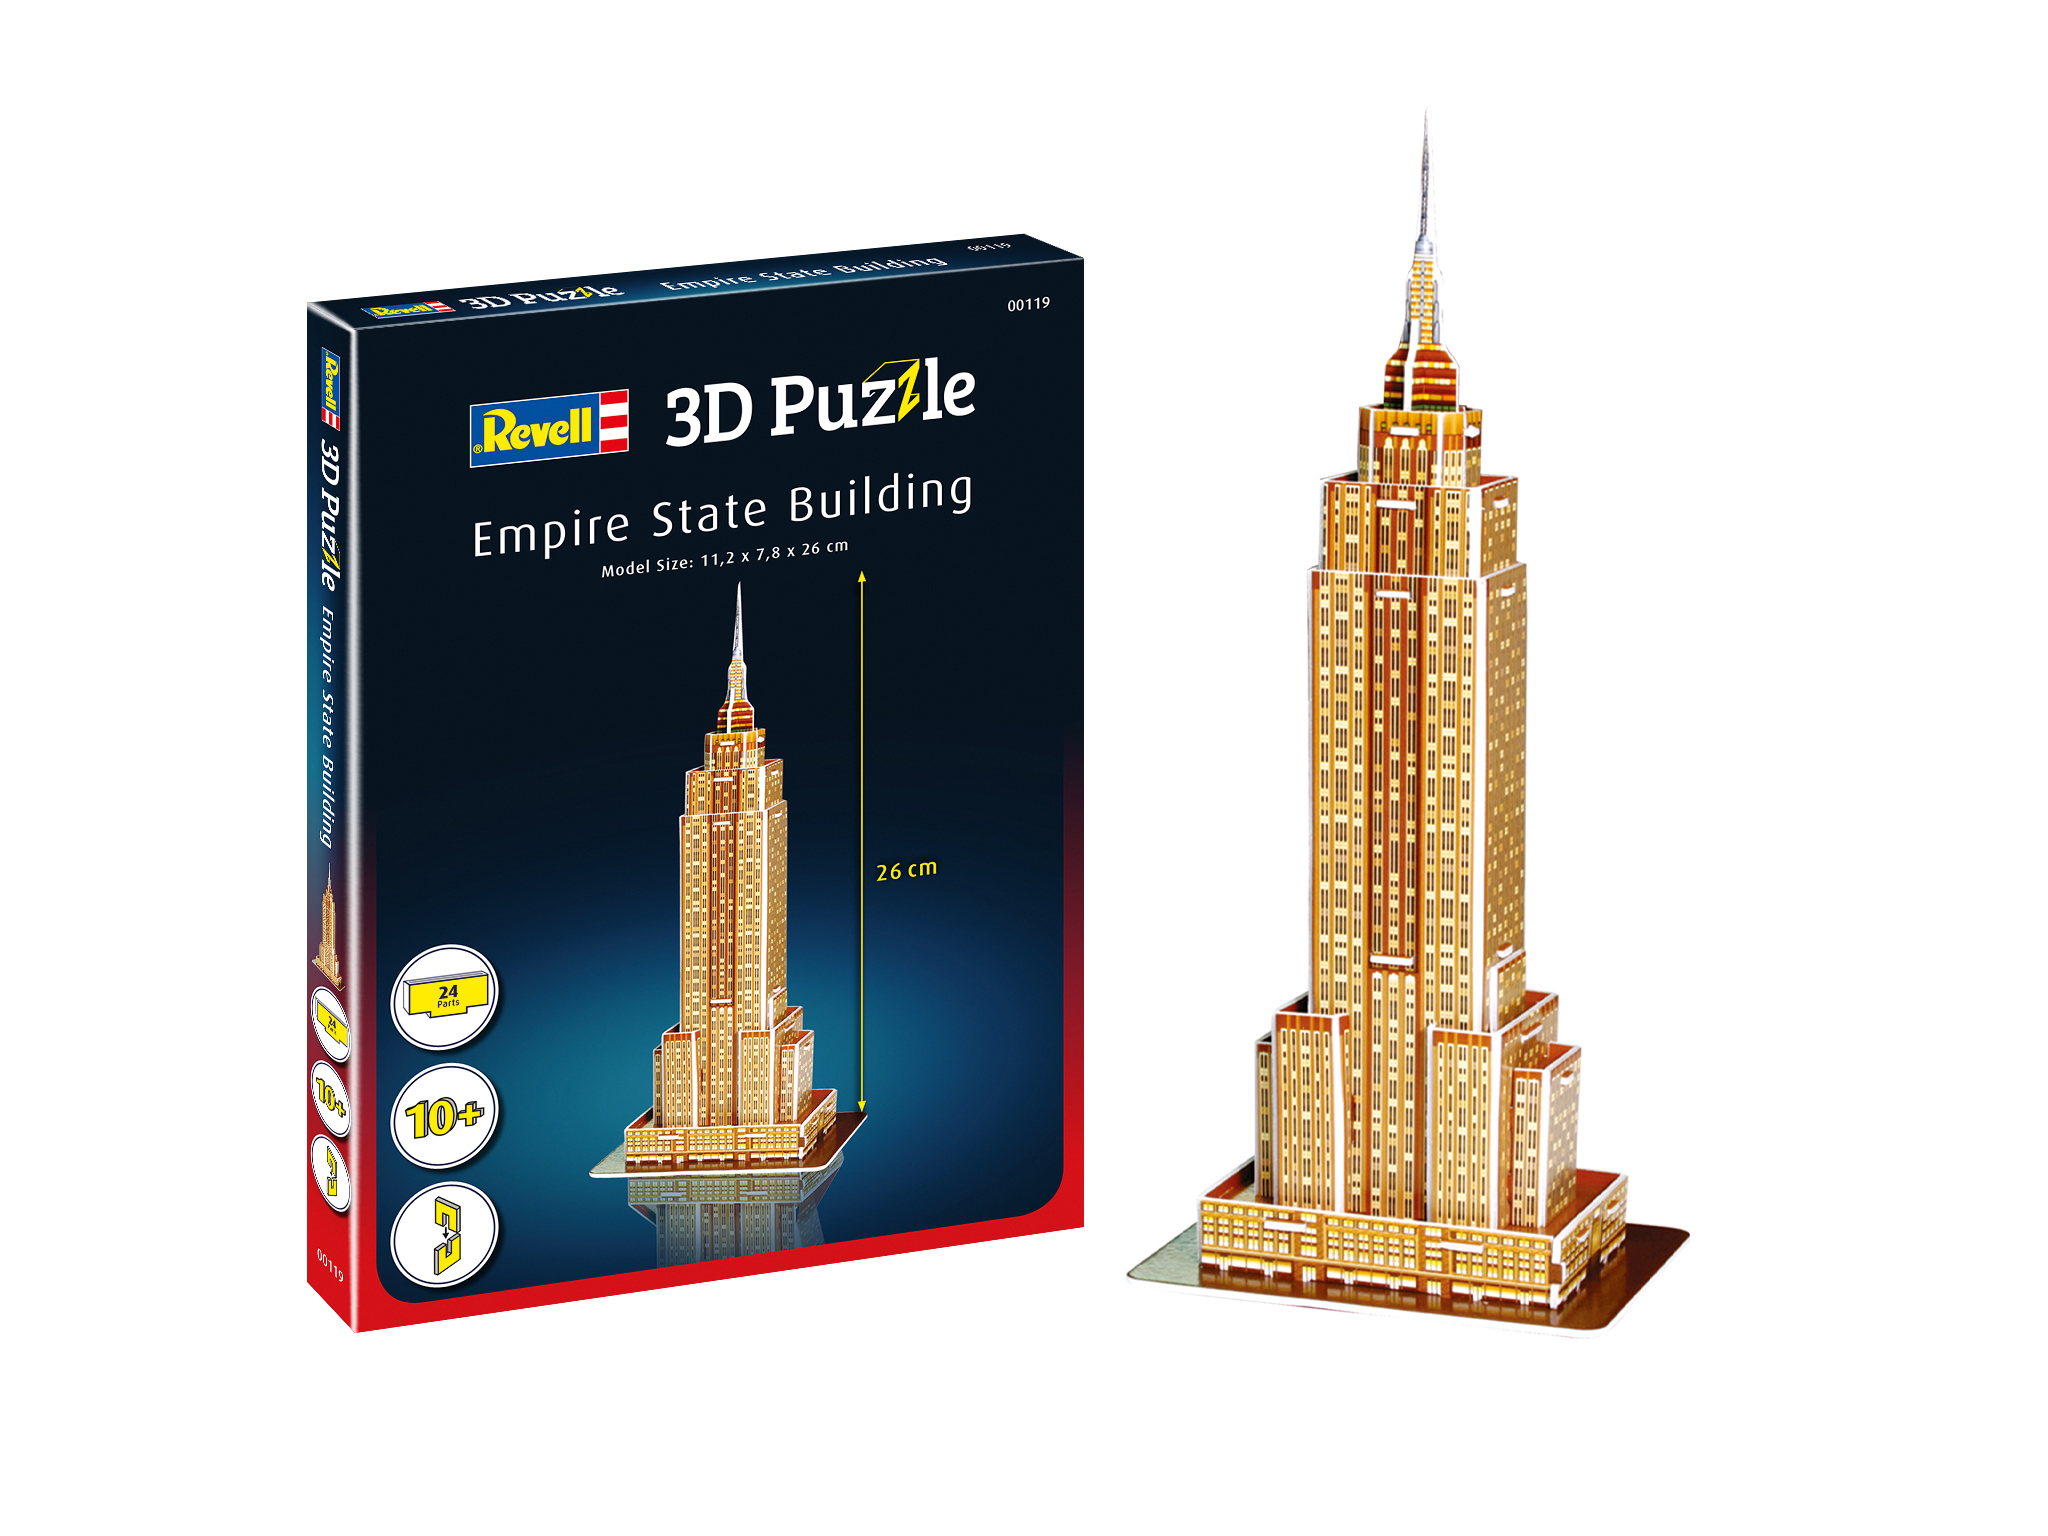 Revell 3D Puzzle Empire State Building